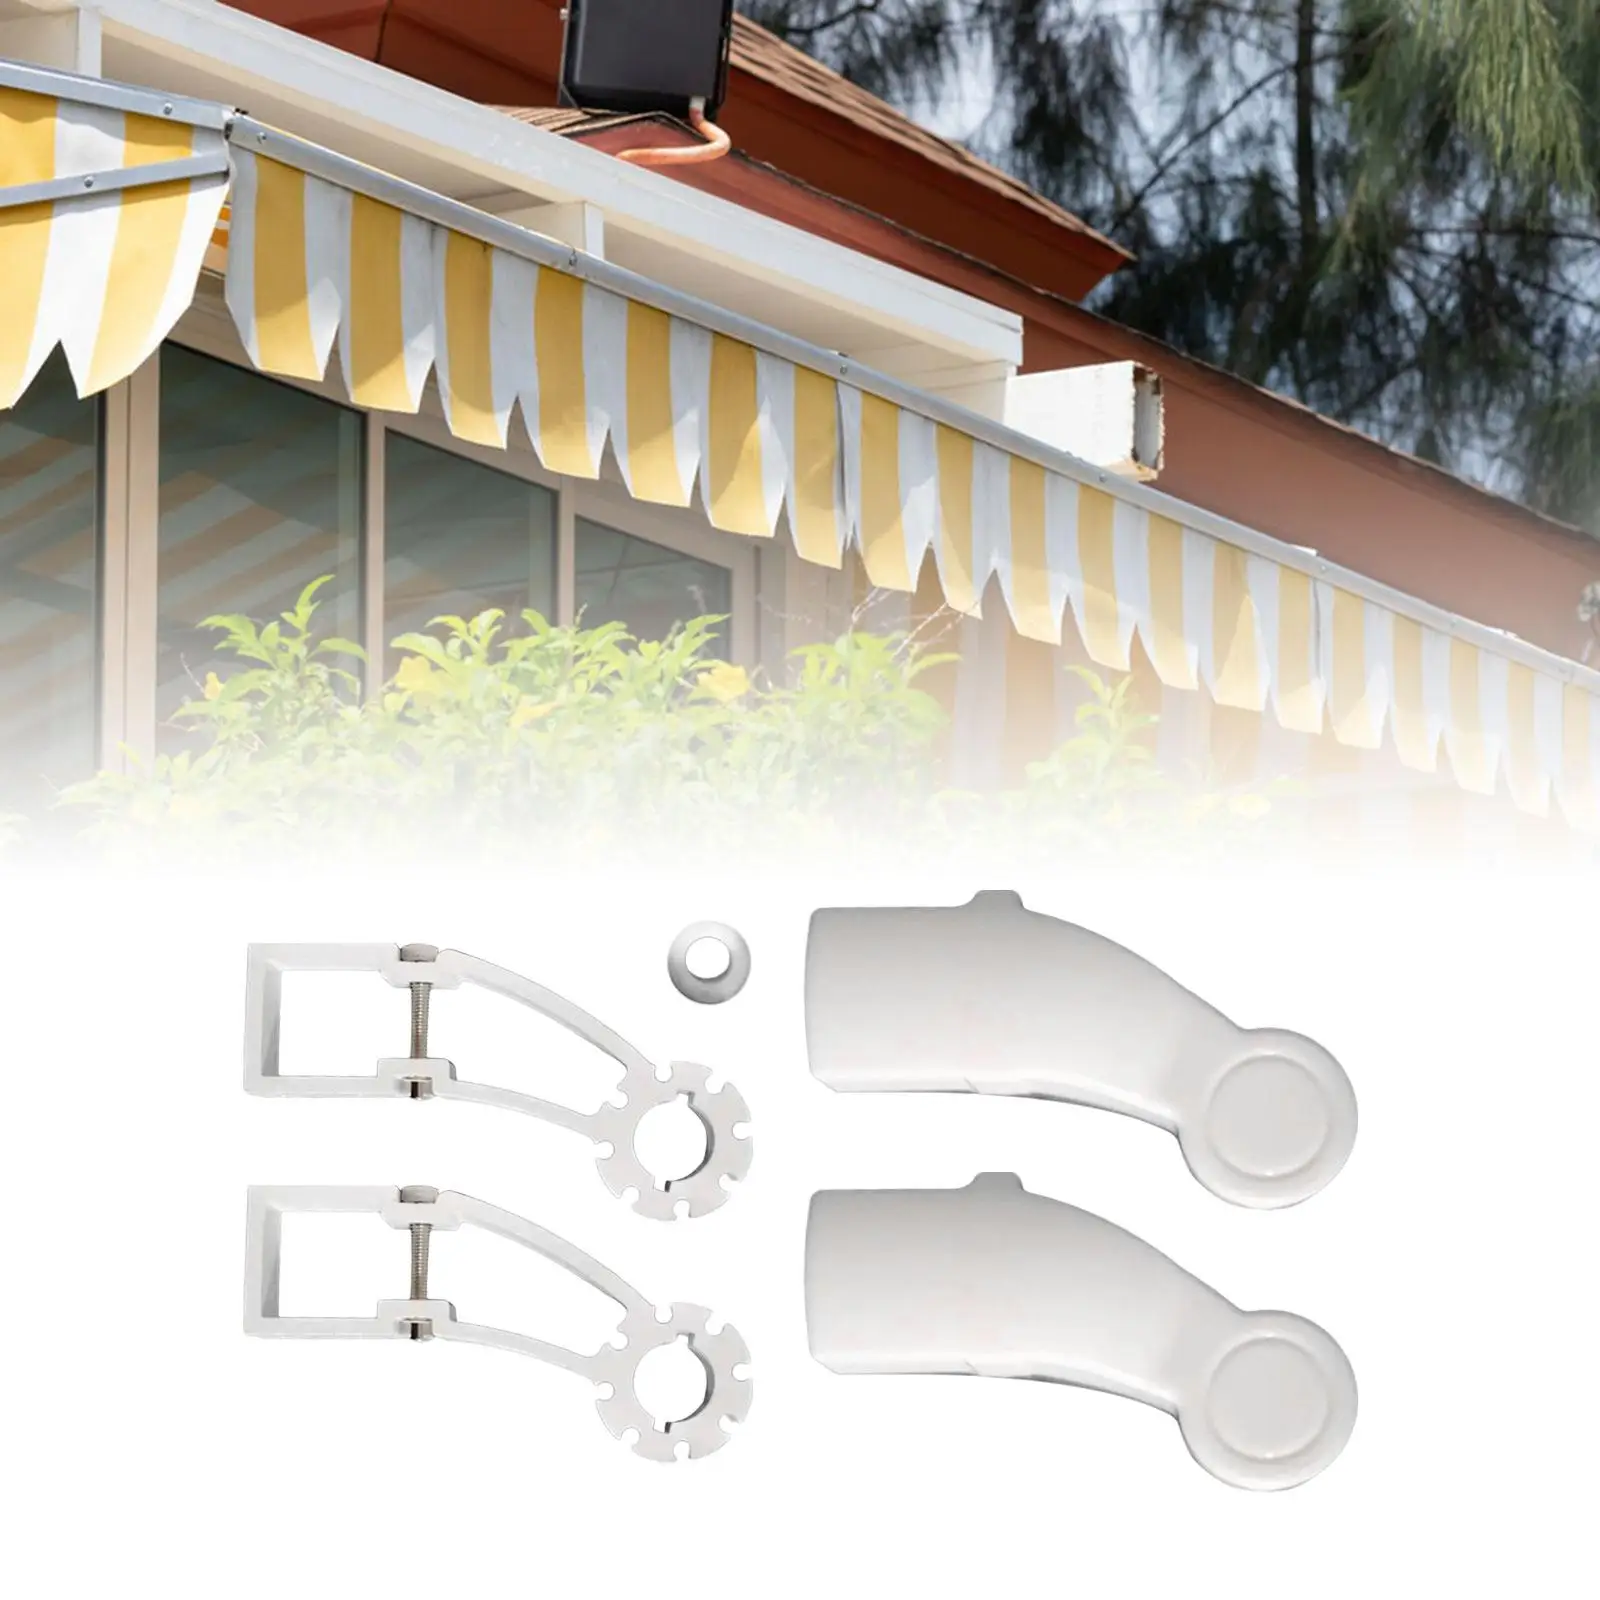 Awning Brackets suits 40mm Square Tube Durable Awning Gearbox Brackets Easy Installation Aluminum Alloy Side Brackets for Camper